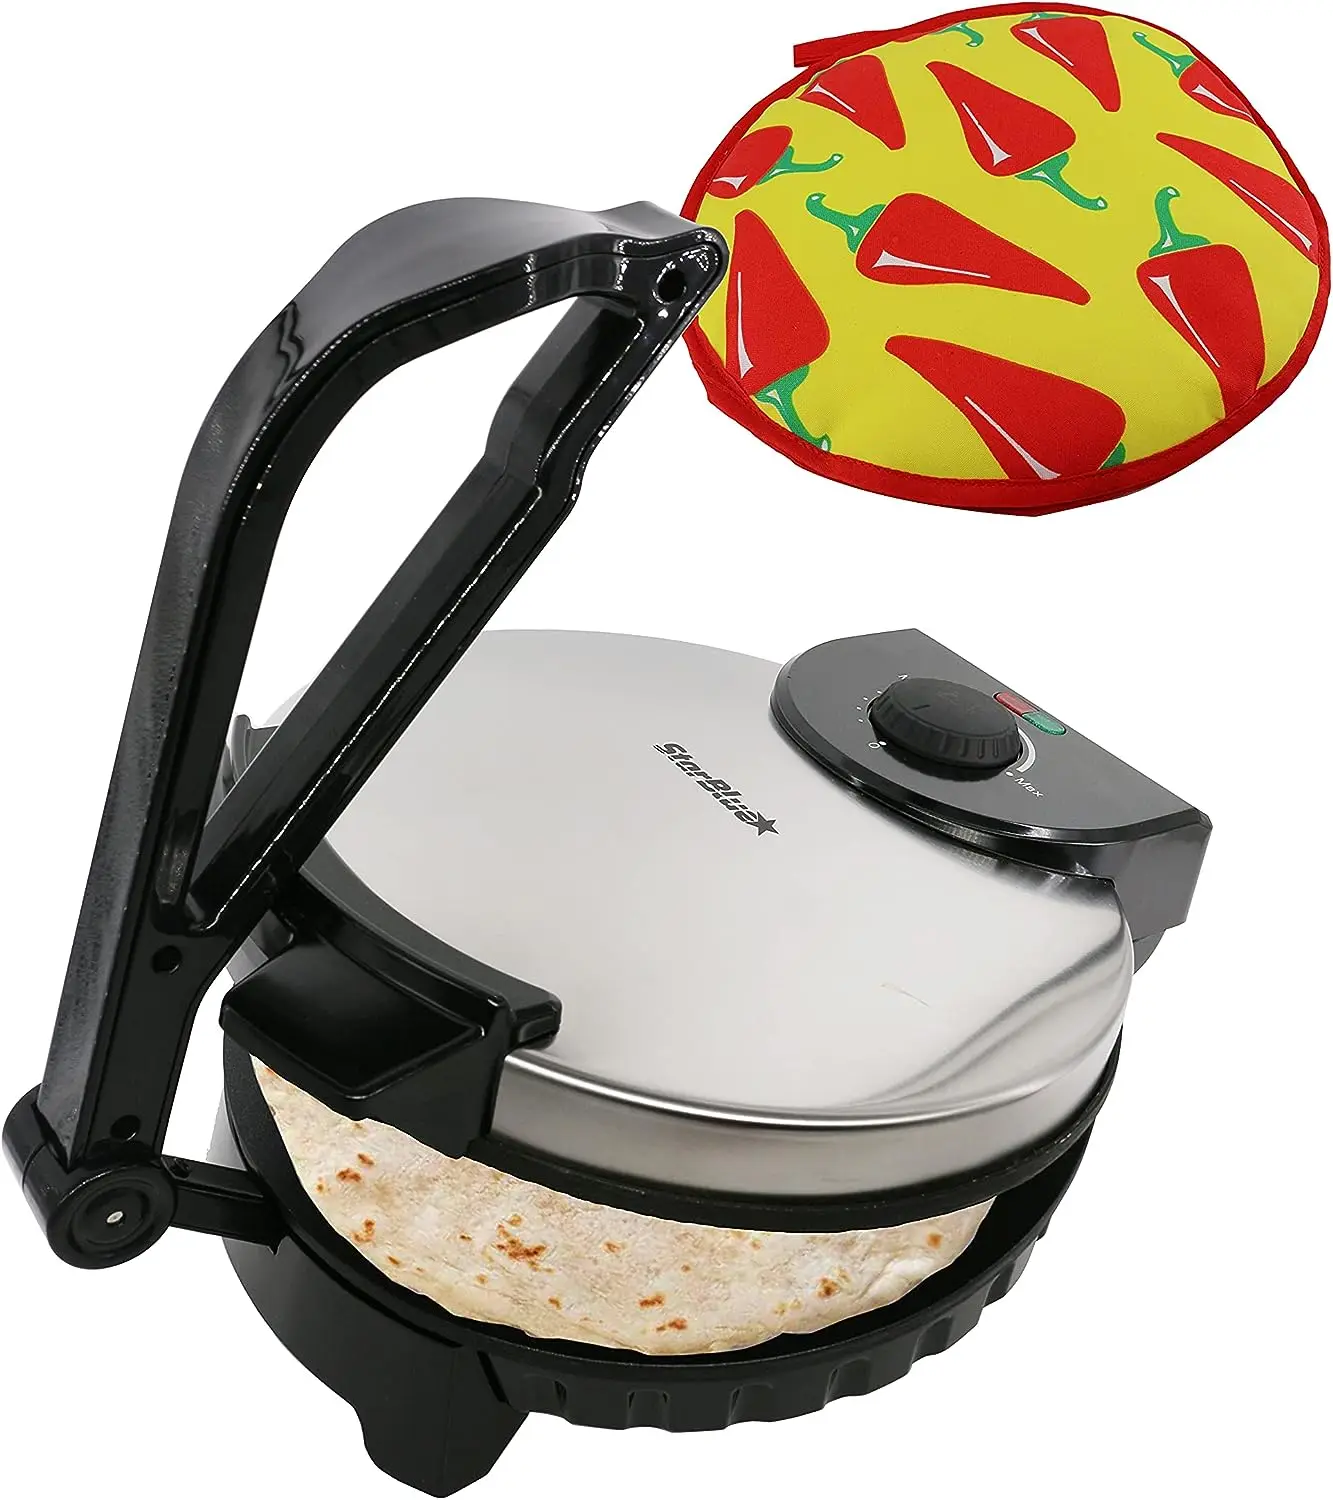 

Roti Maker by with FREE Roti Warmer - The automatic Stainless Steel Non-Stick machine to make Indian style Chapati, Tortilla,